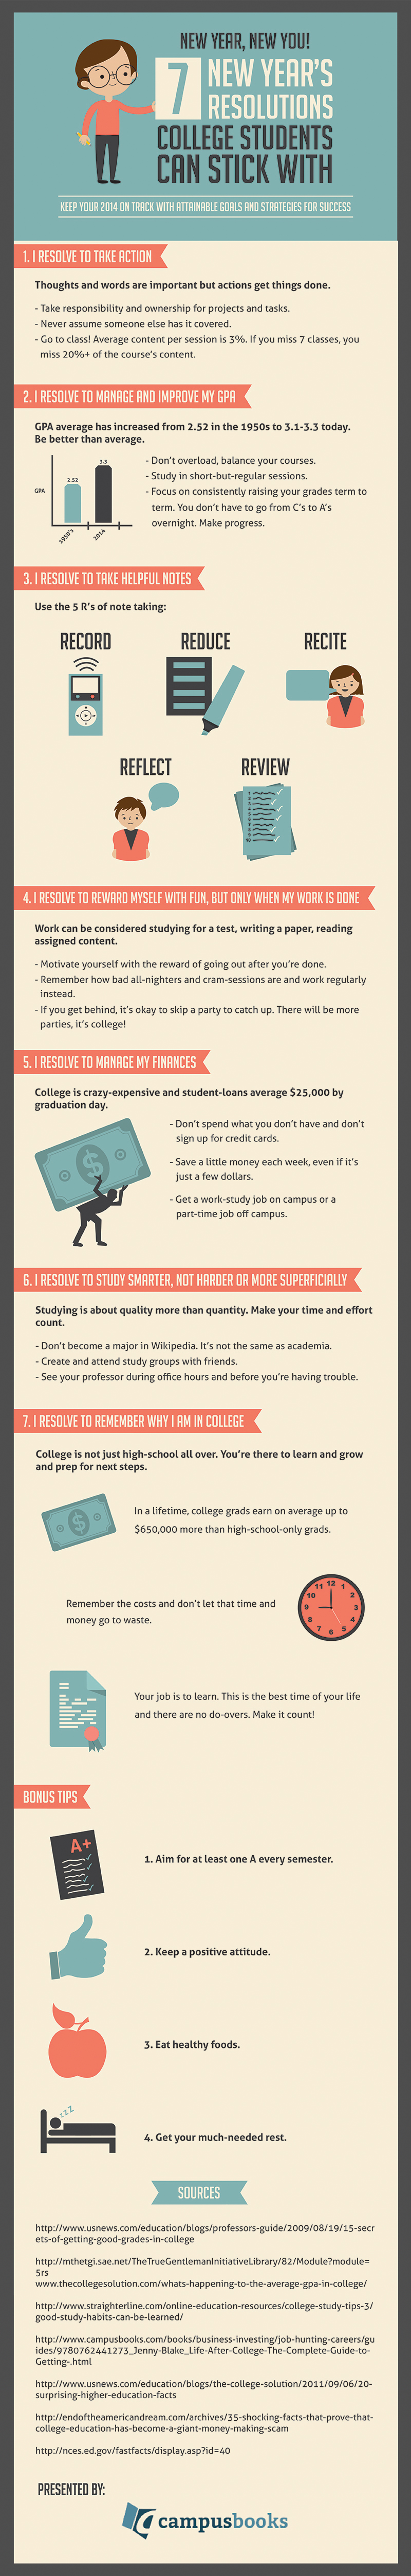 Resolutions for College Success